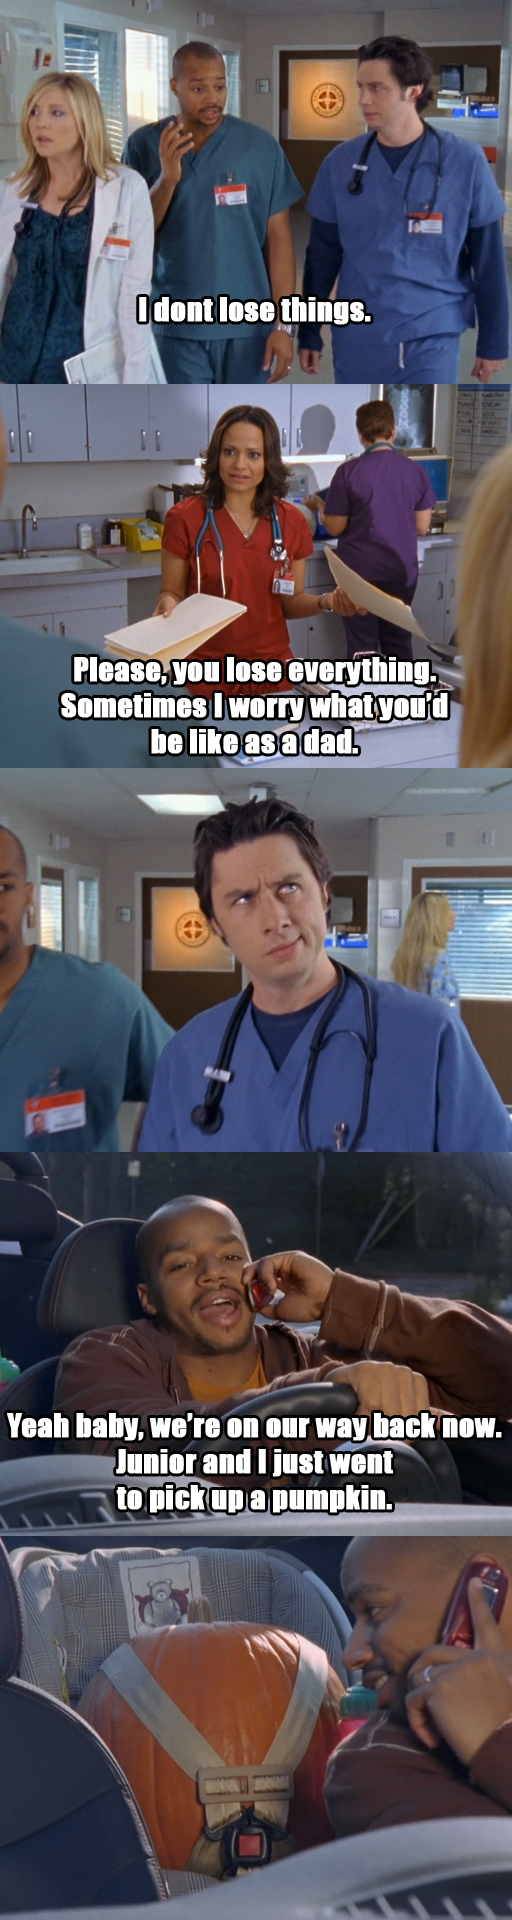 This reminds me of how bad I want scrubs to be on Netflix